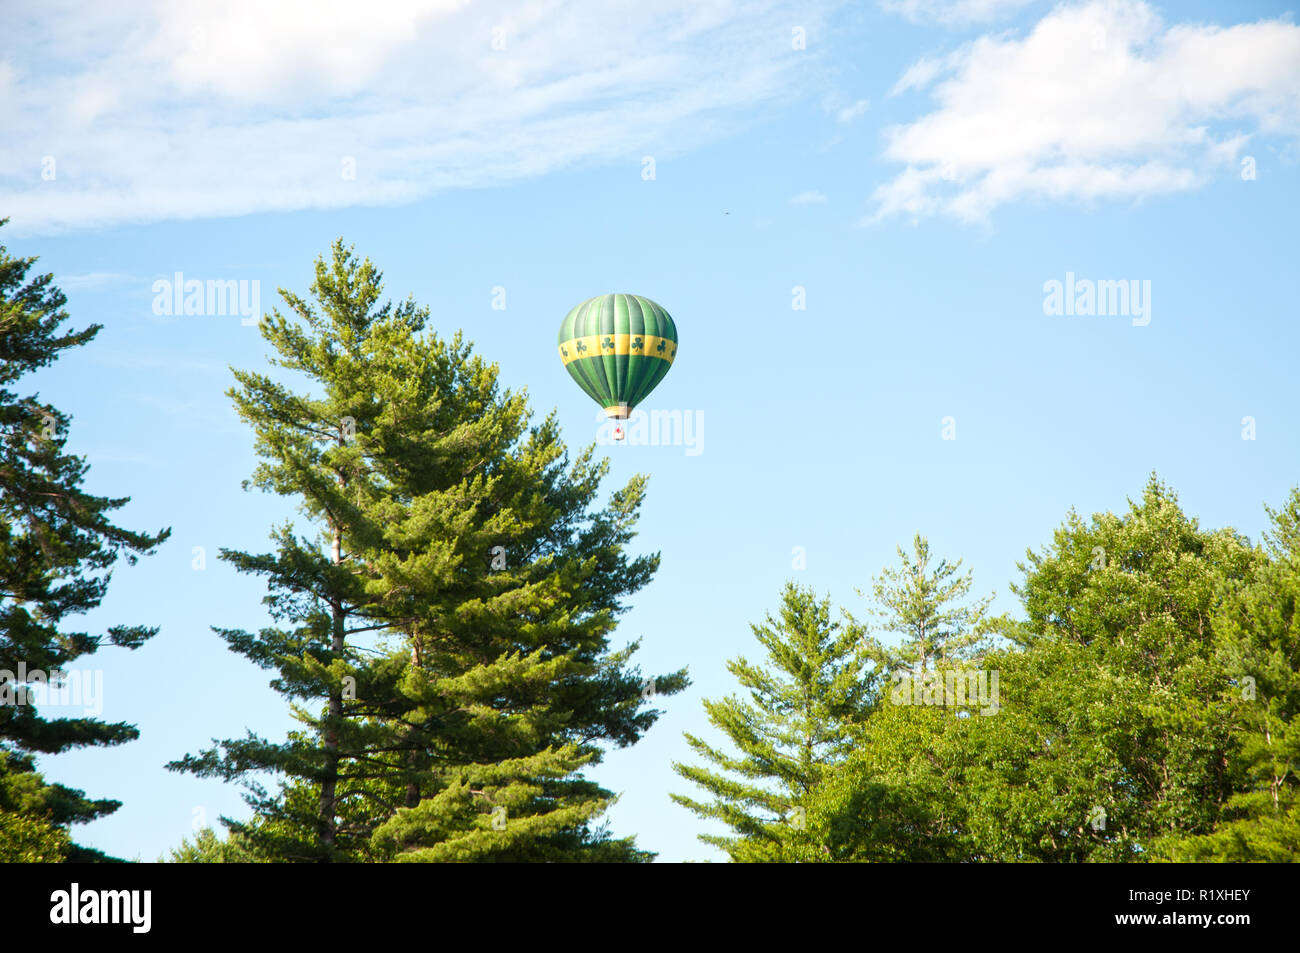 Trees add to the adventure of floating in the air. Stock Photo